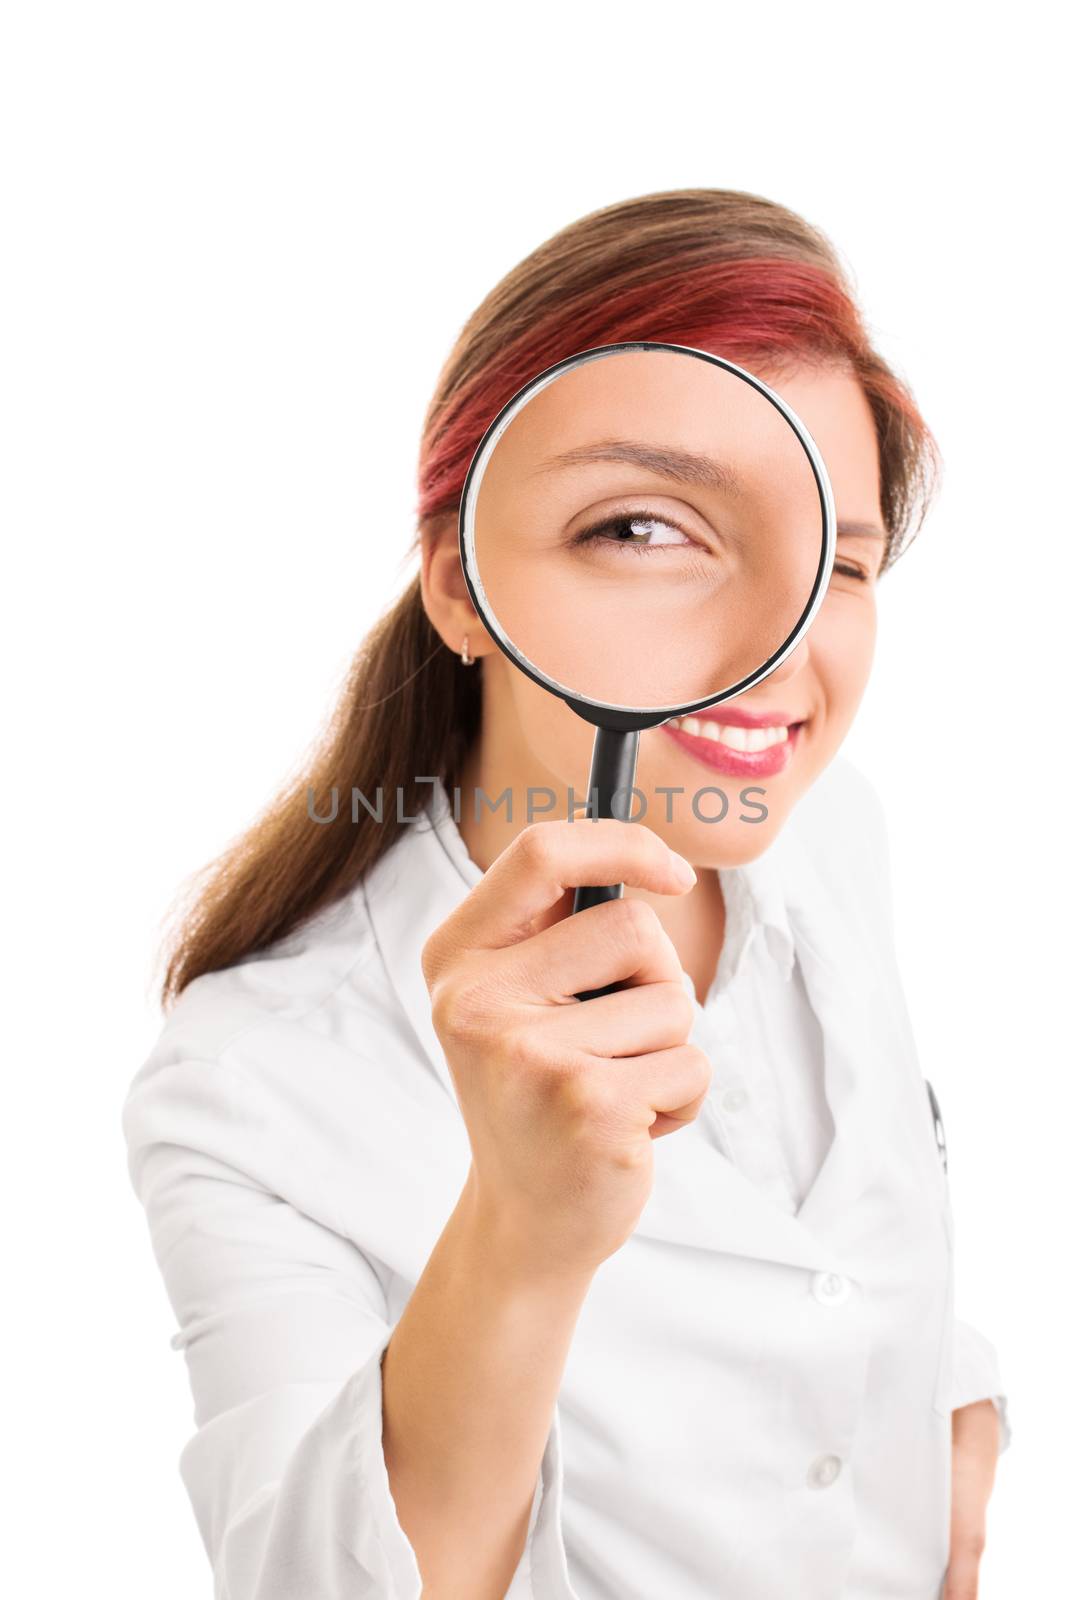 Let me take a look at you. Close up shot of a beautiful smiling young doctor looking though a magnifying glass, isolated on white background.